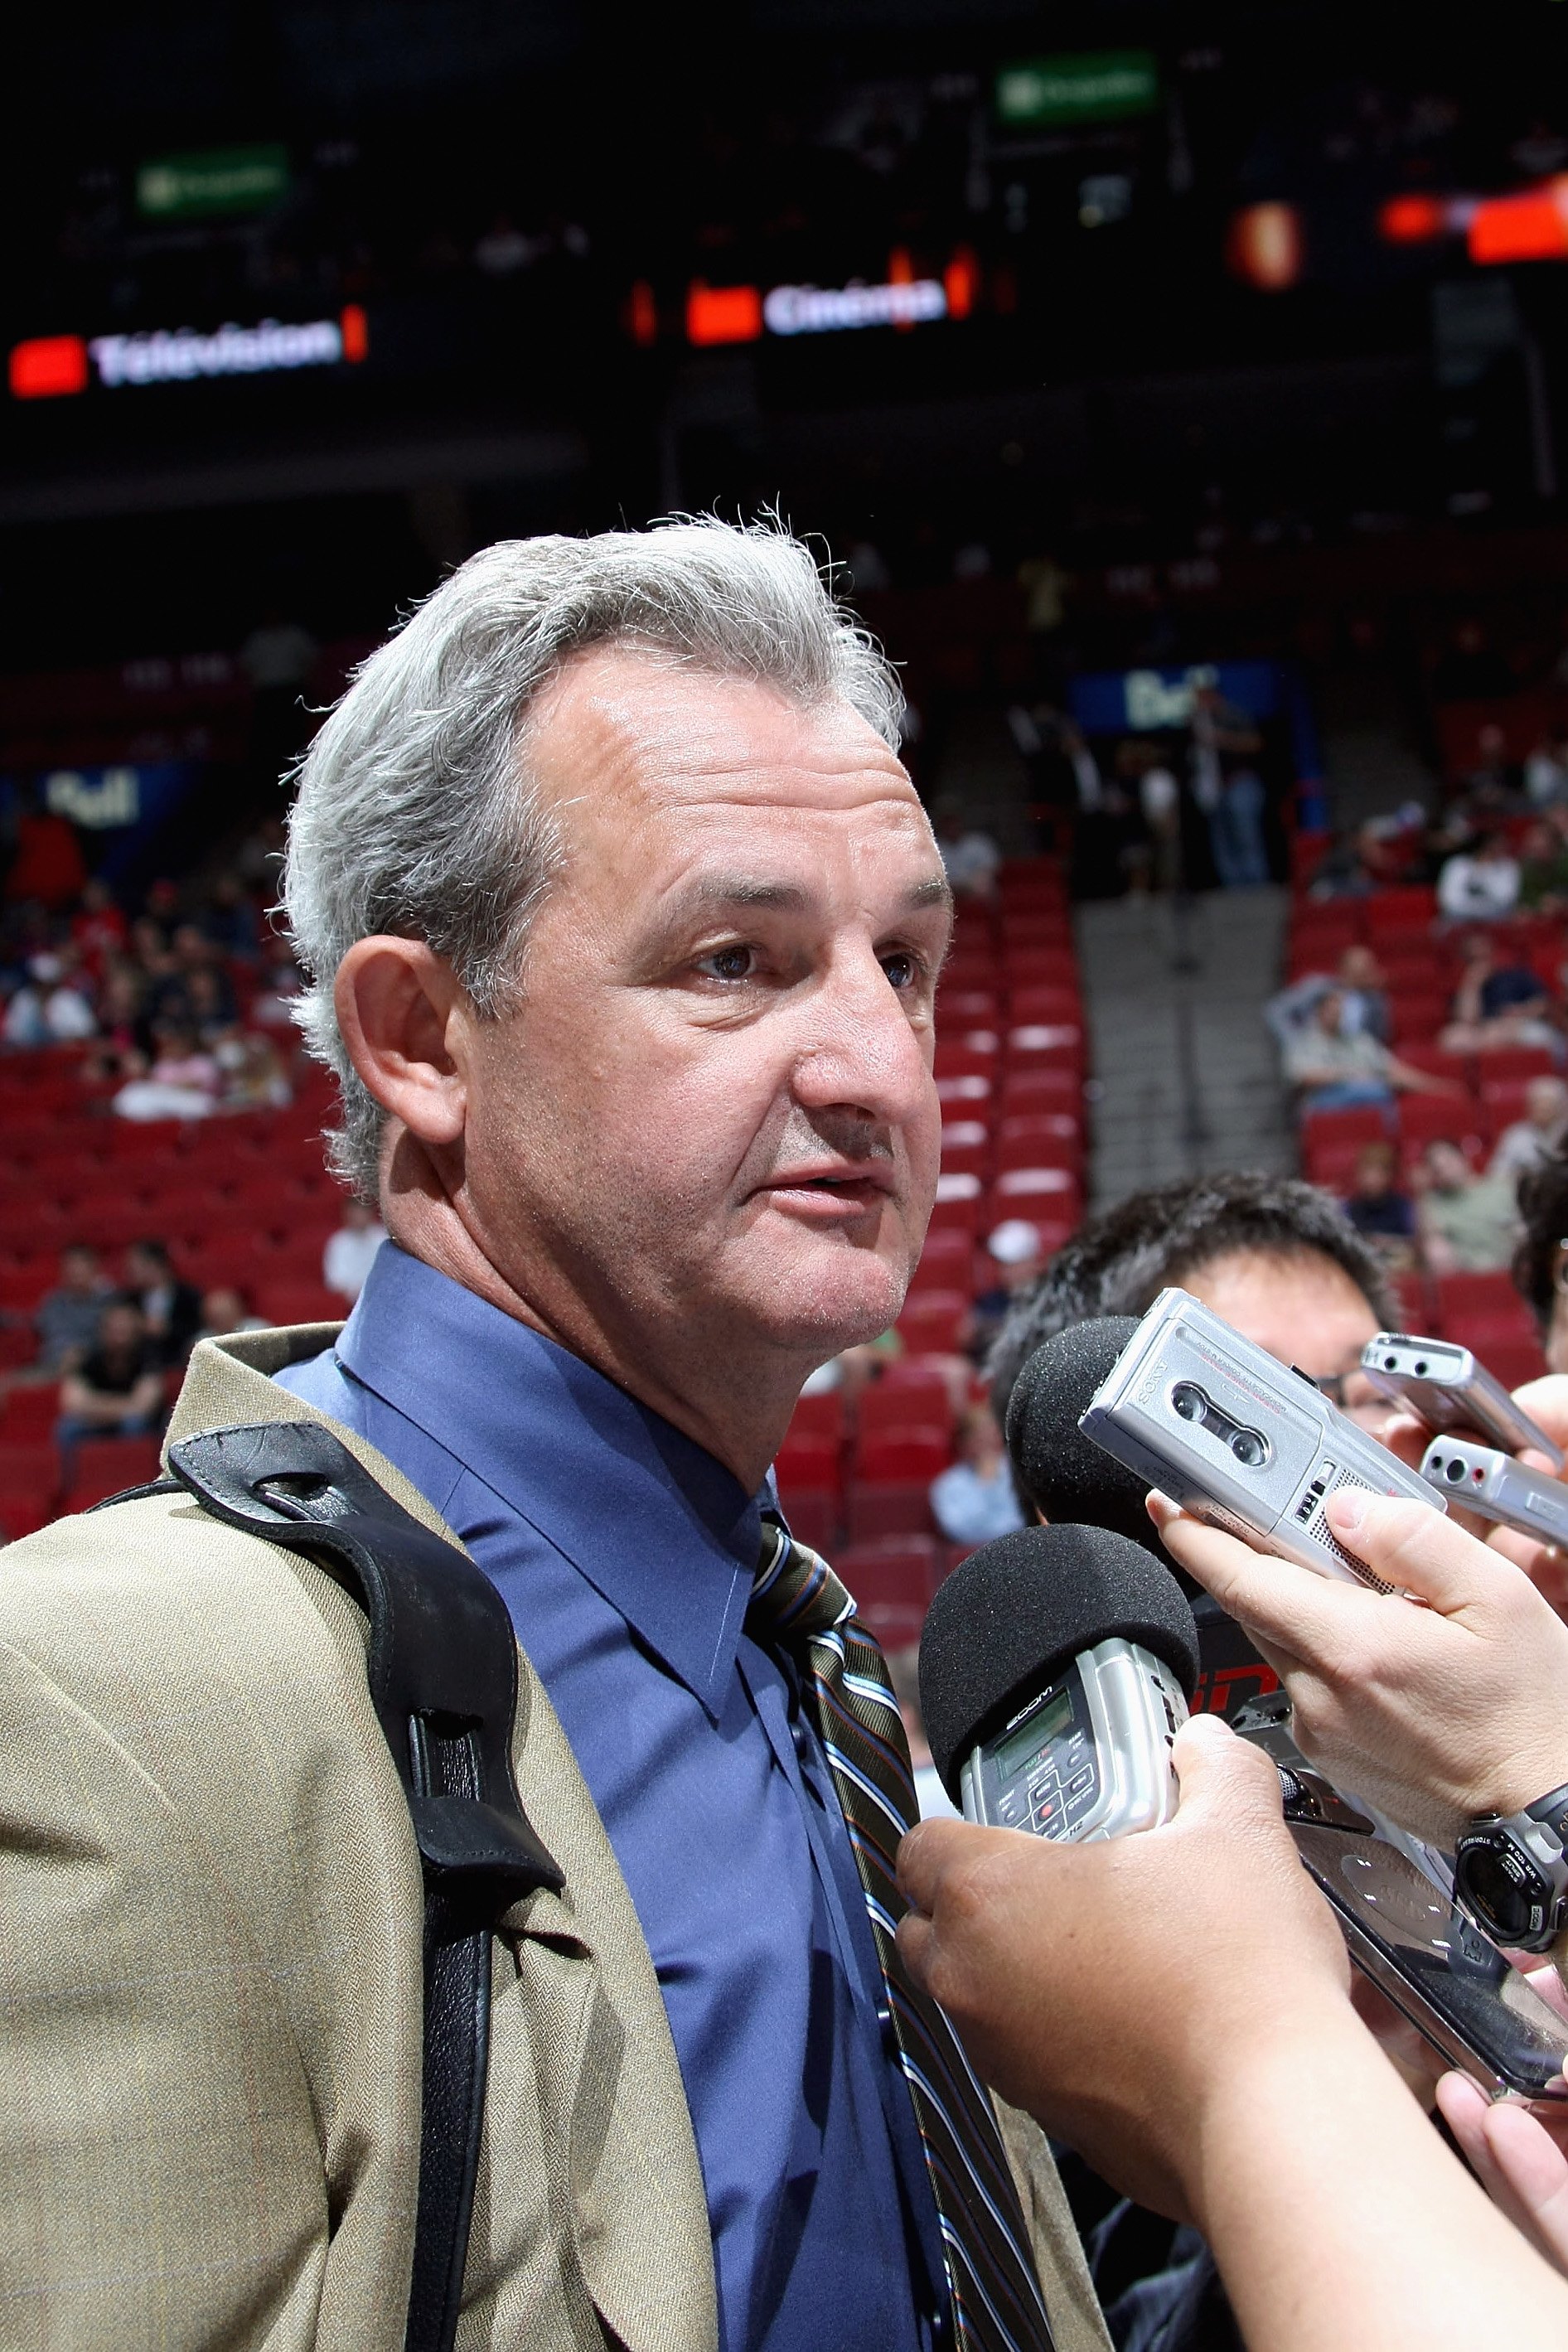 MONTREAL, QC - JUNE 27:  General Manager Darryl Sutter of the Calgary Flames speaks with the media during the 2009 NHL Entry Draft at the Bell Centre on June 27, 2009 in Montreal, Quebec, Canada. (Photo by Bruce Bennett/Getty Images)